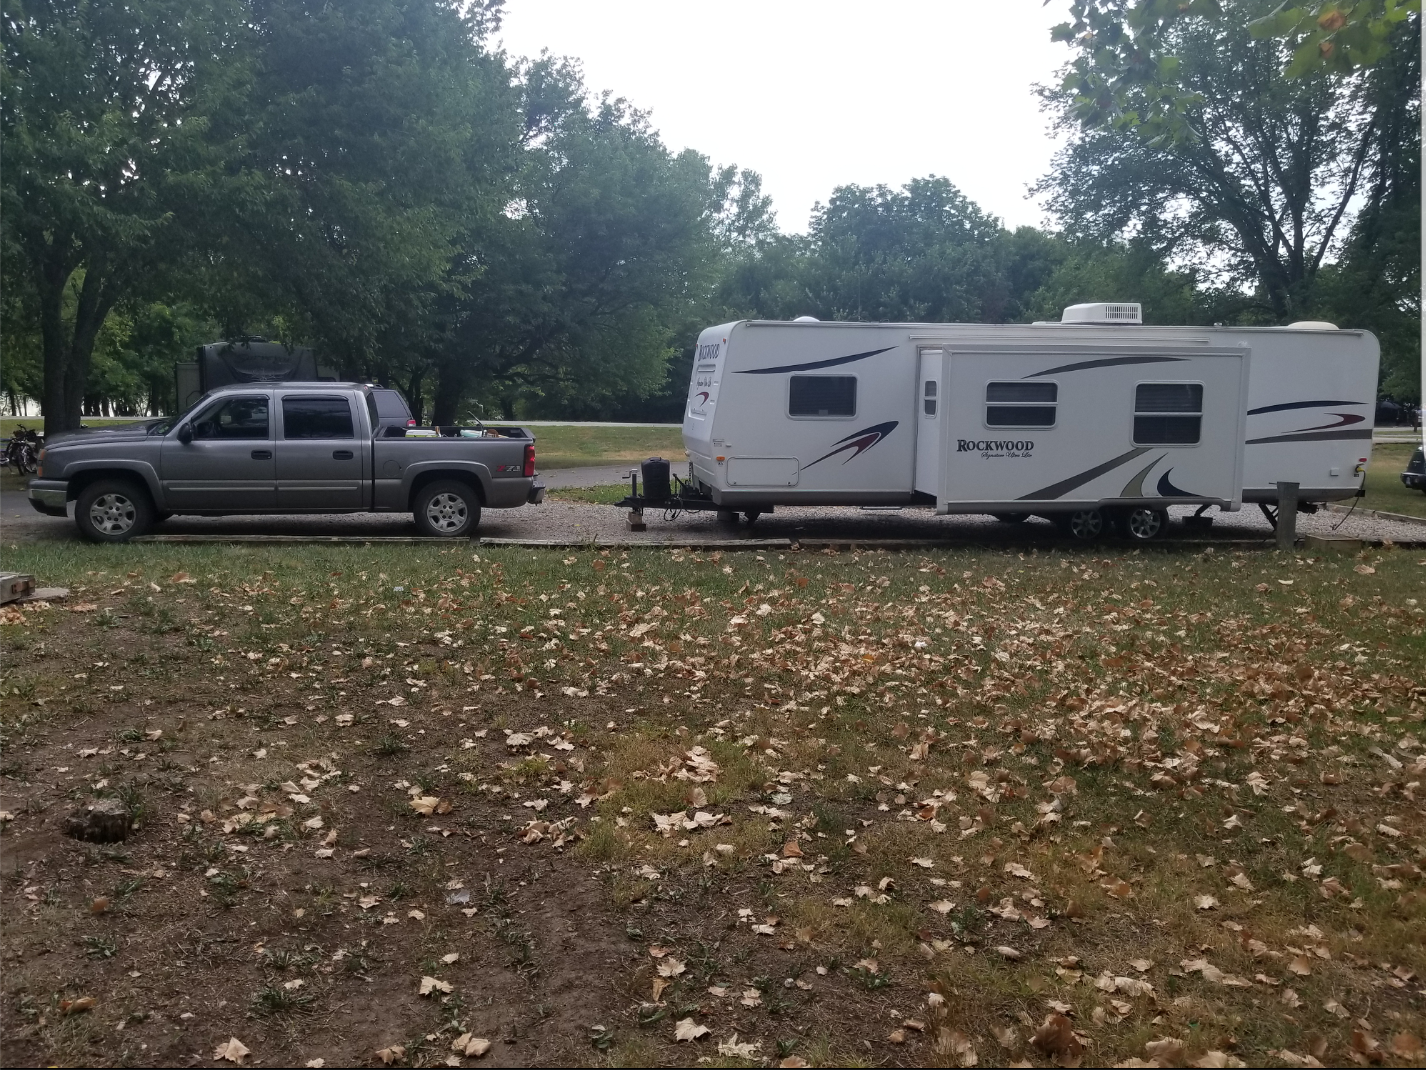 Suzy’s RVing Excursion- Getting More Out Of Life